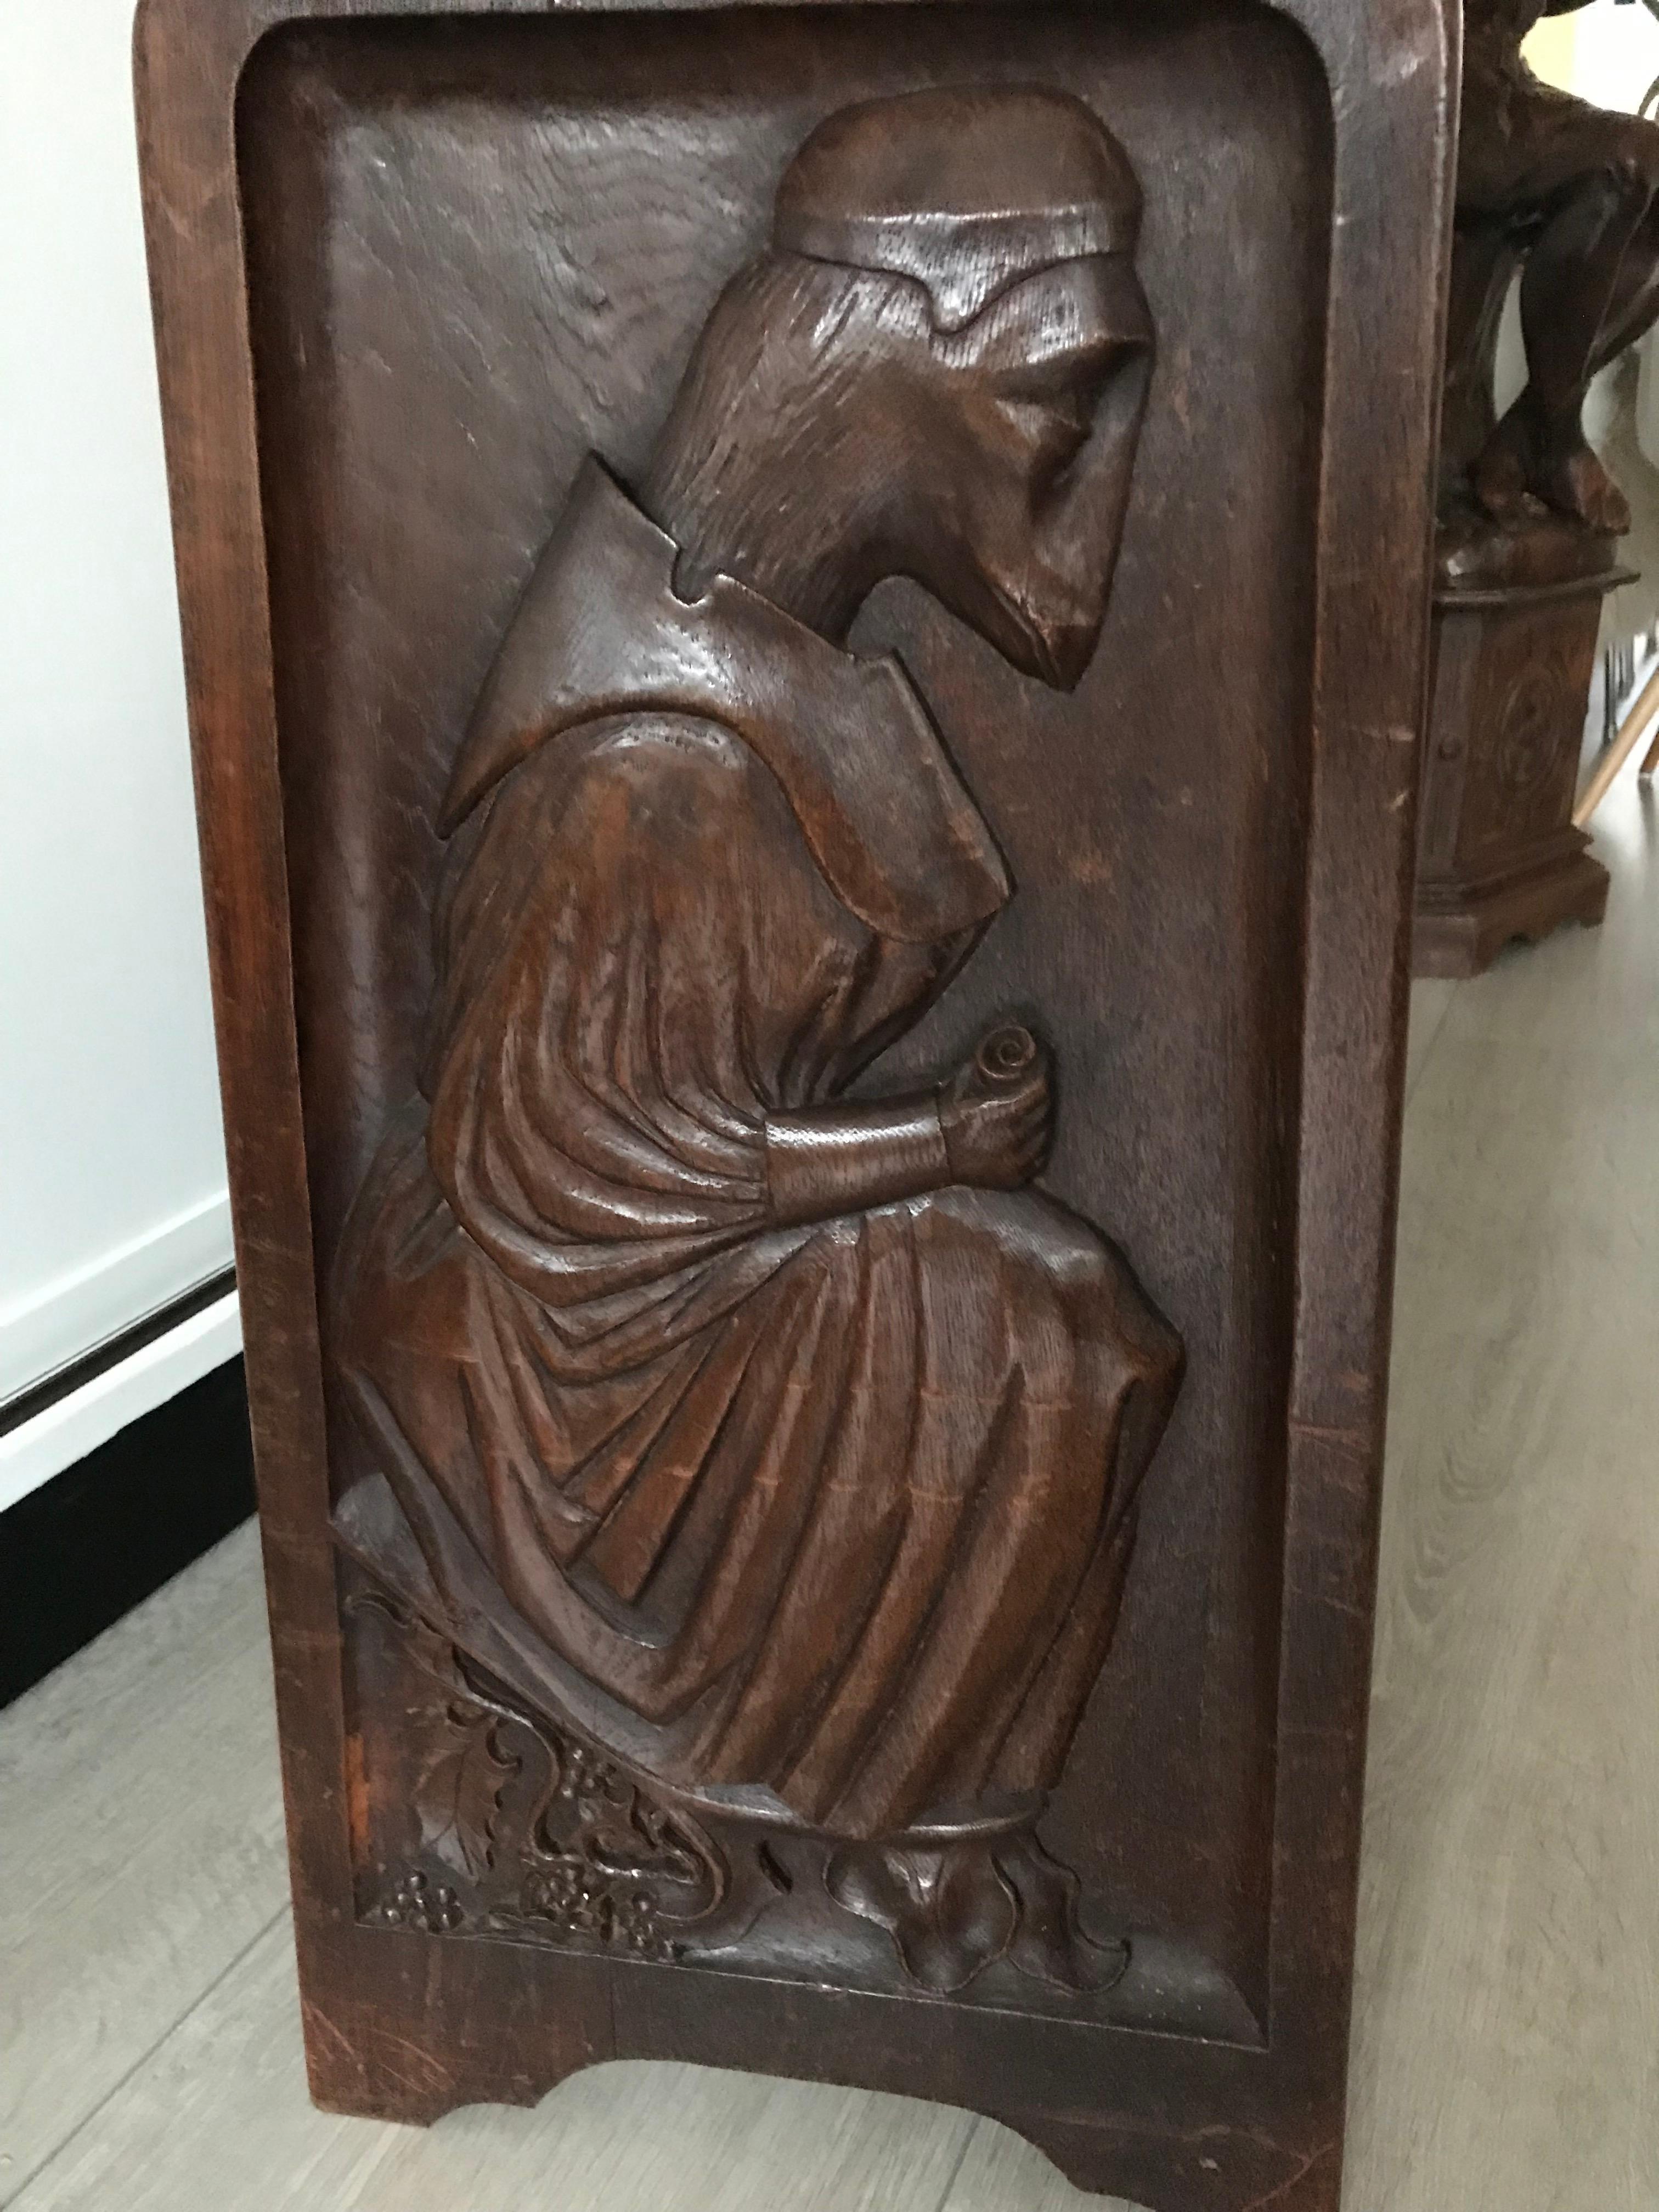 Hand-Carved Gothic Revival Stool, Bench with Hand Carved Sheep and Wolve Biblical Sculptures